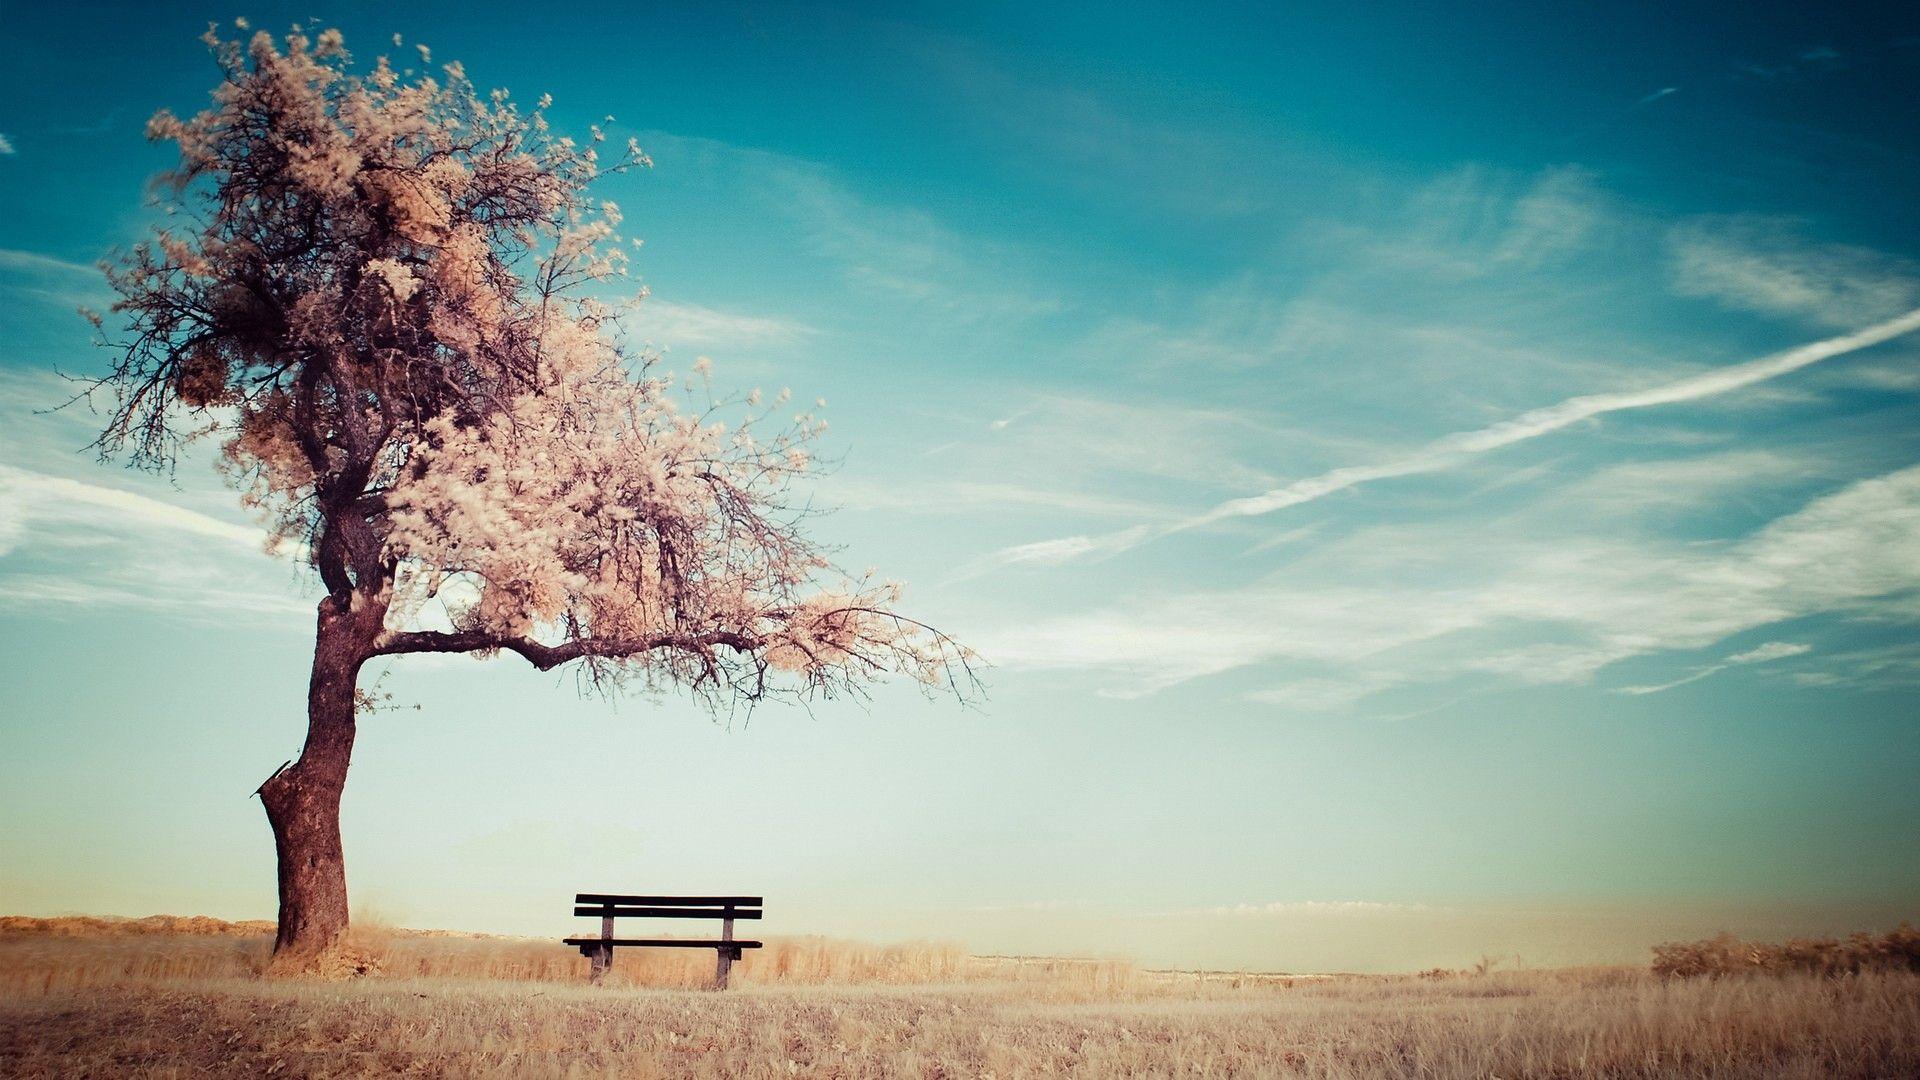 Cherry Blossoms by the Bench HD Wallpaper FullHDWpp HD